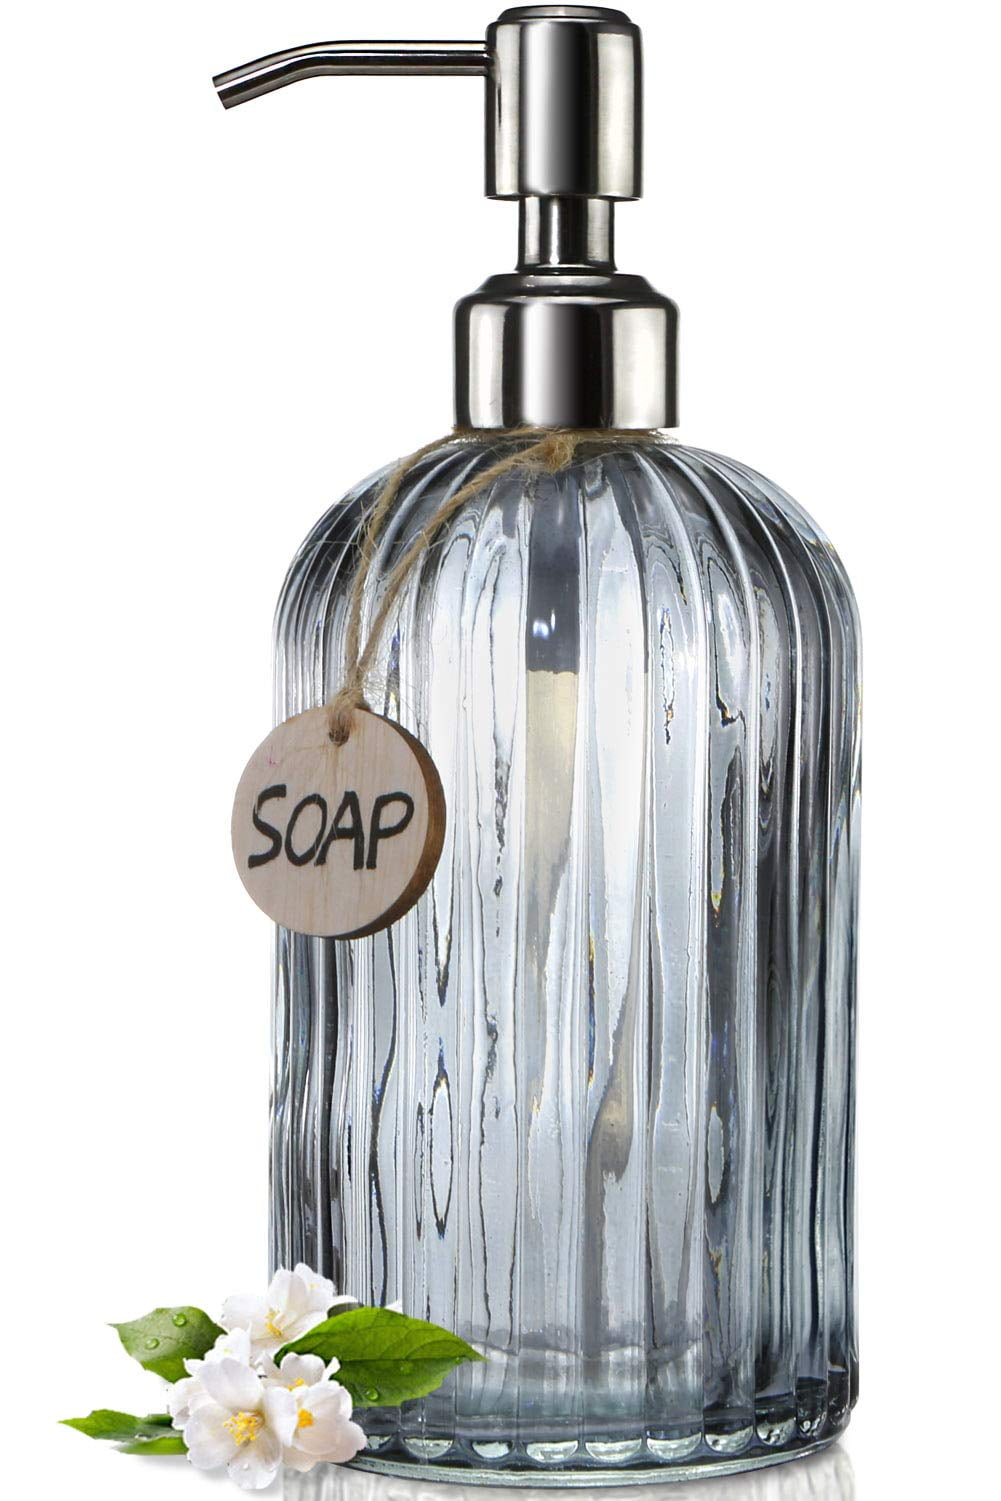 Details about   JASAI 18 Oz Clear Glass Soap Dispenser with Rust Proof Stainless Steel Pump,